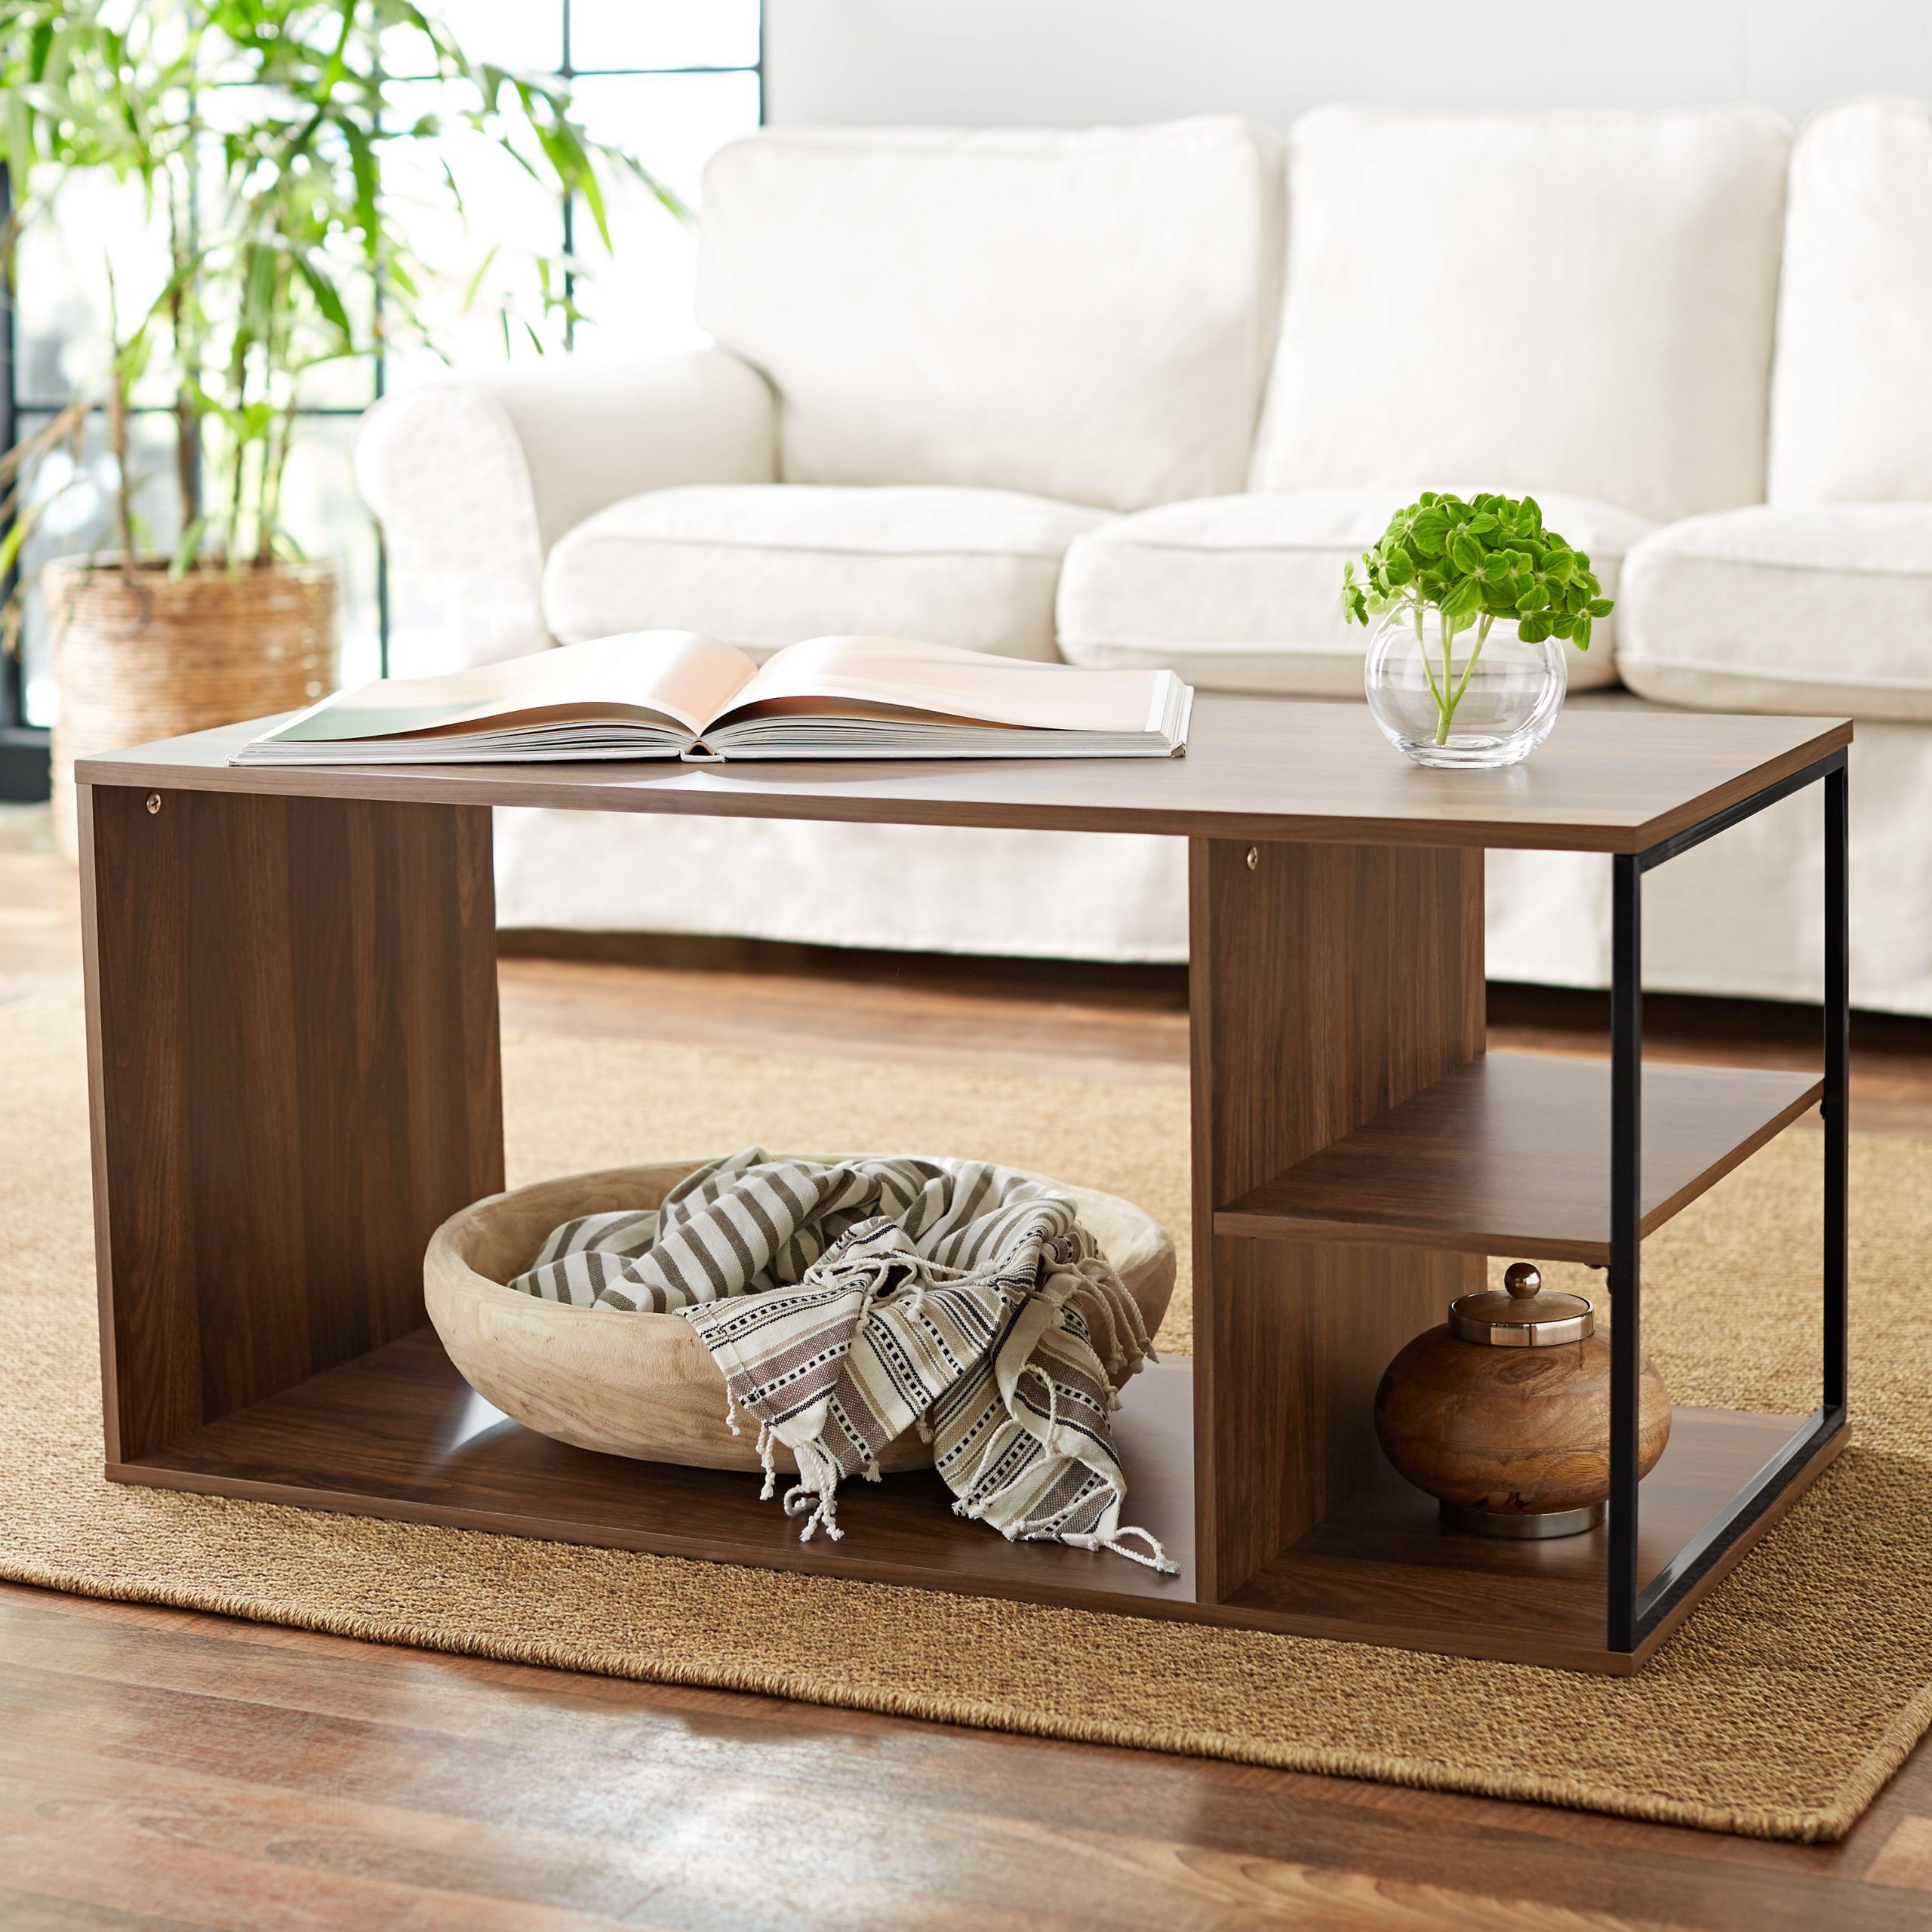 Mainstays Kalla Wood And Metal Coffee Table – Walmart Inside Well Liked Espresso Wood Storage Coffee Tables (View 2 of 20)